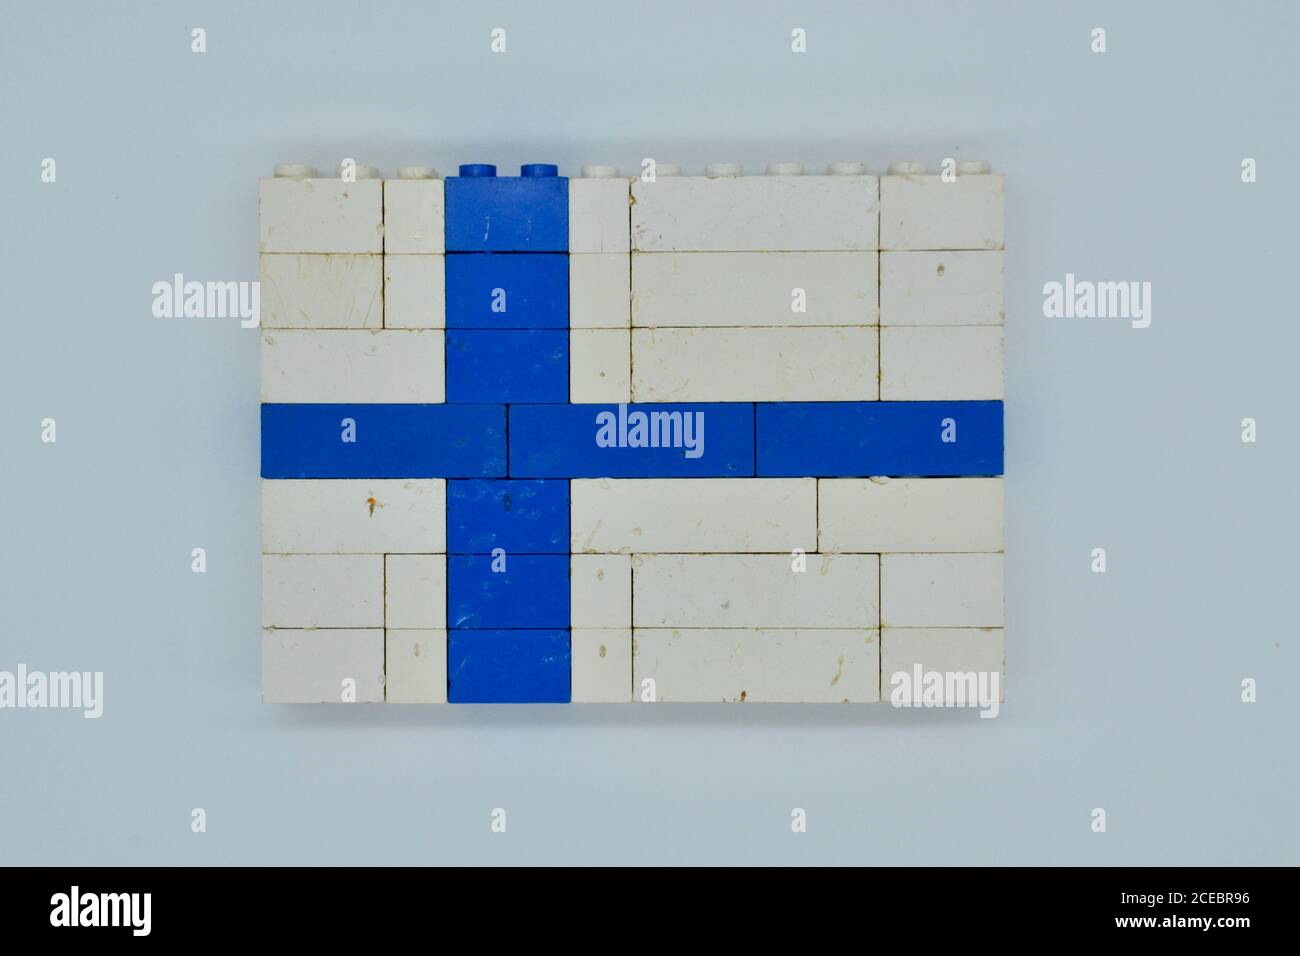 Concept national flag of Finland made from blue and white vintage plastic children's Lego building bricks Stock Photo